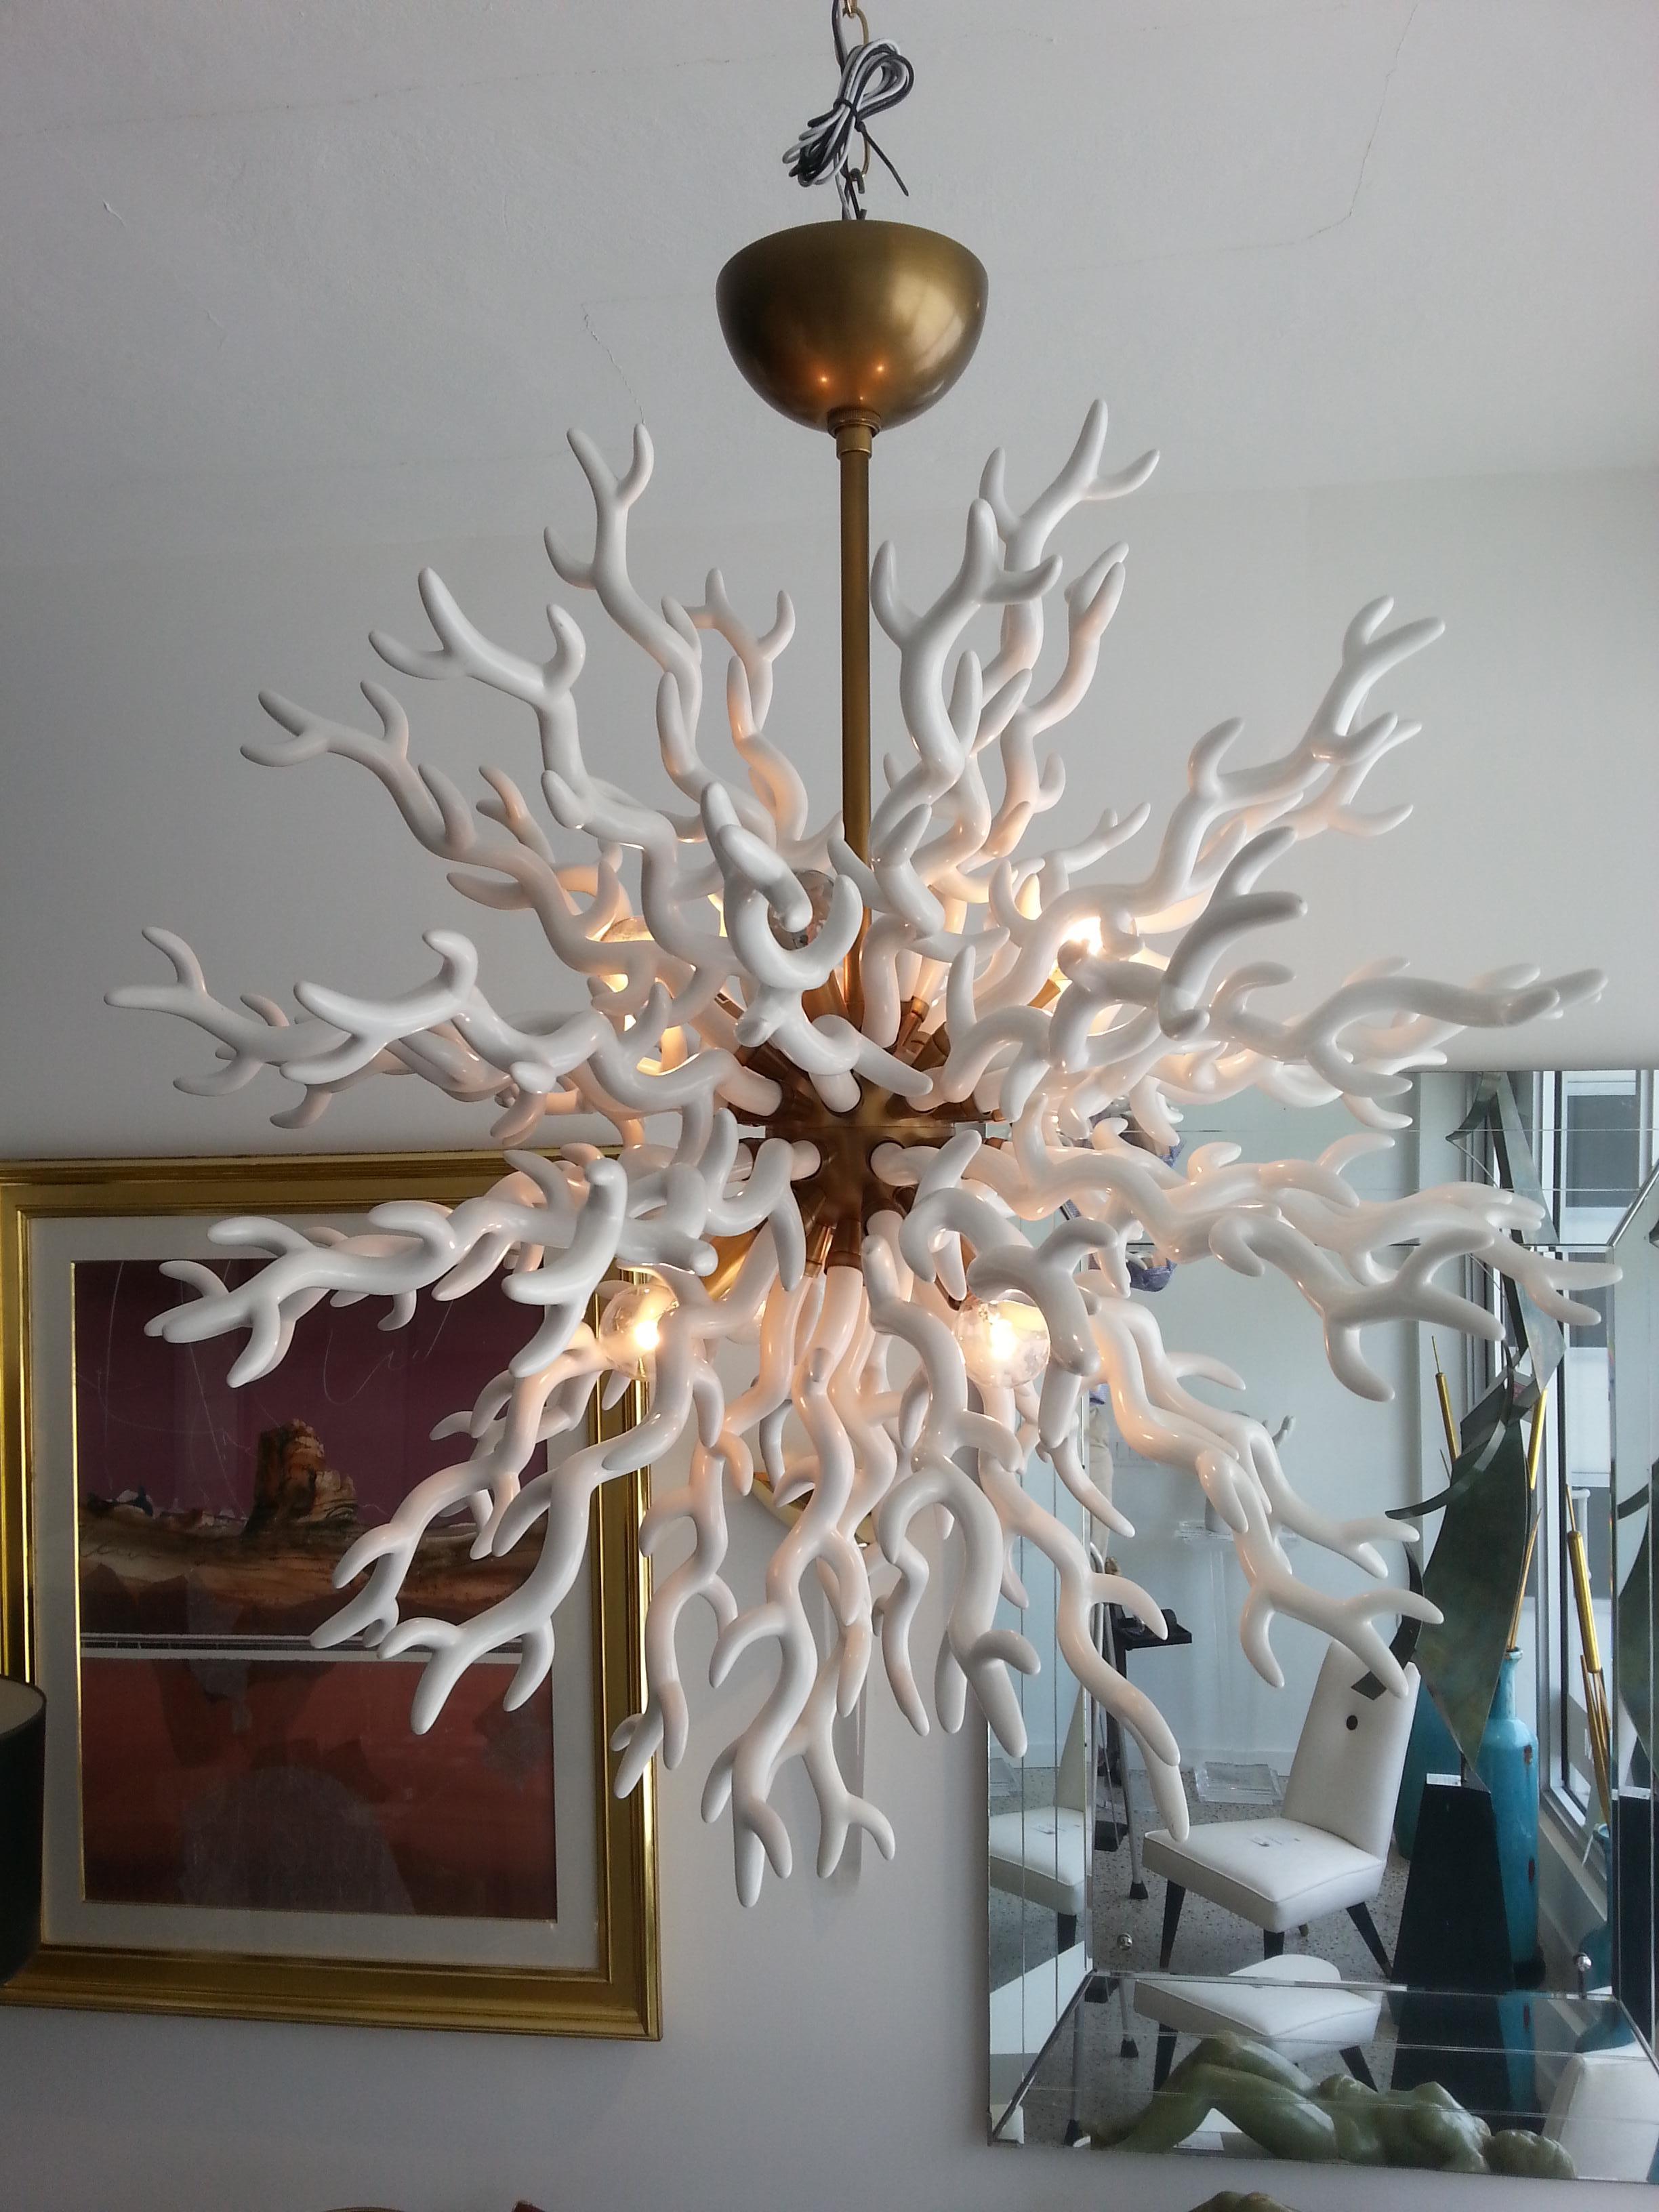 This stylish and chic faux coral chandelier is very much in the style of pieces created by Tony Duquette.

Note: Required eight candelabra based light bulbs.